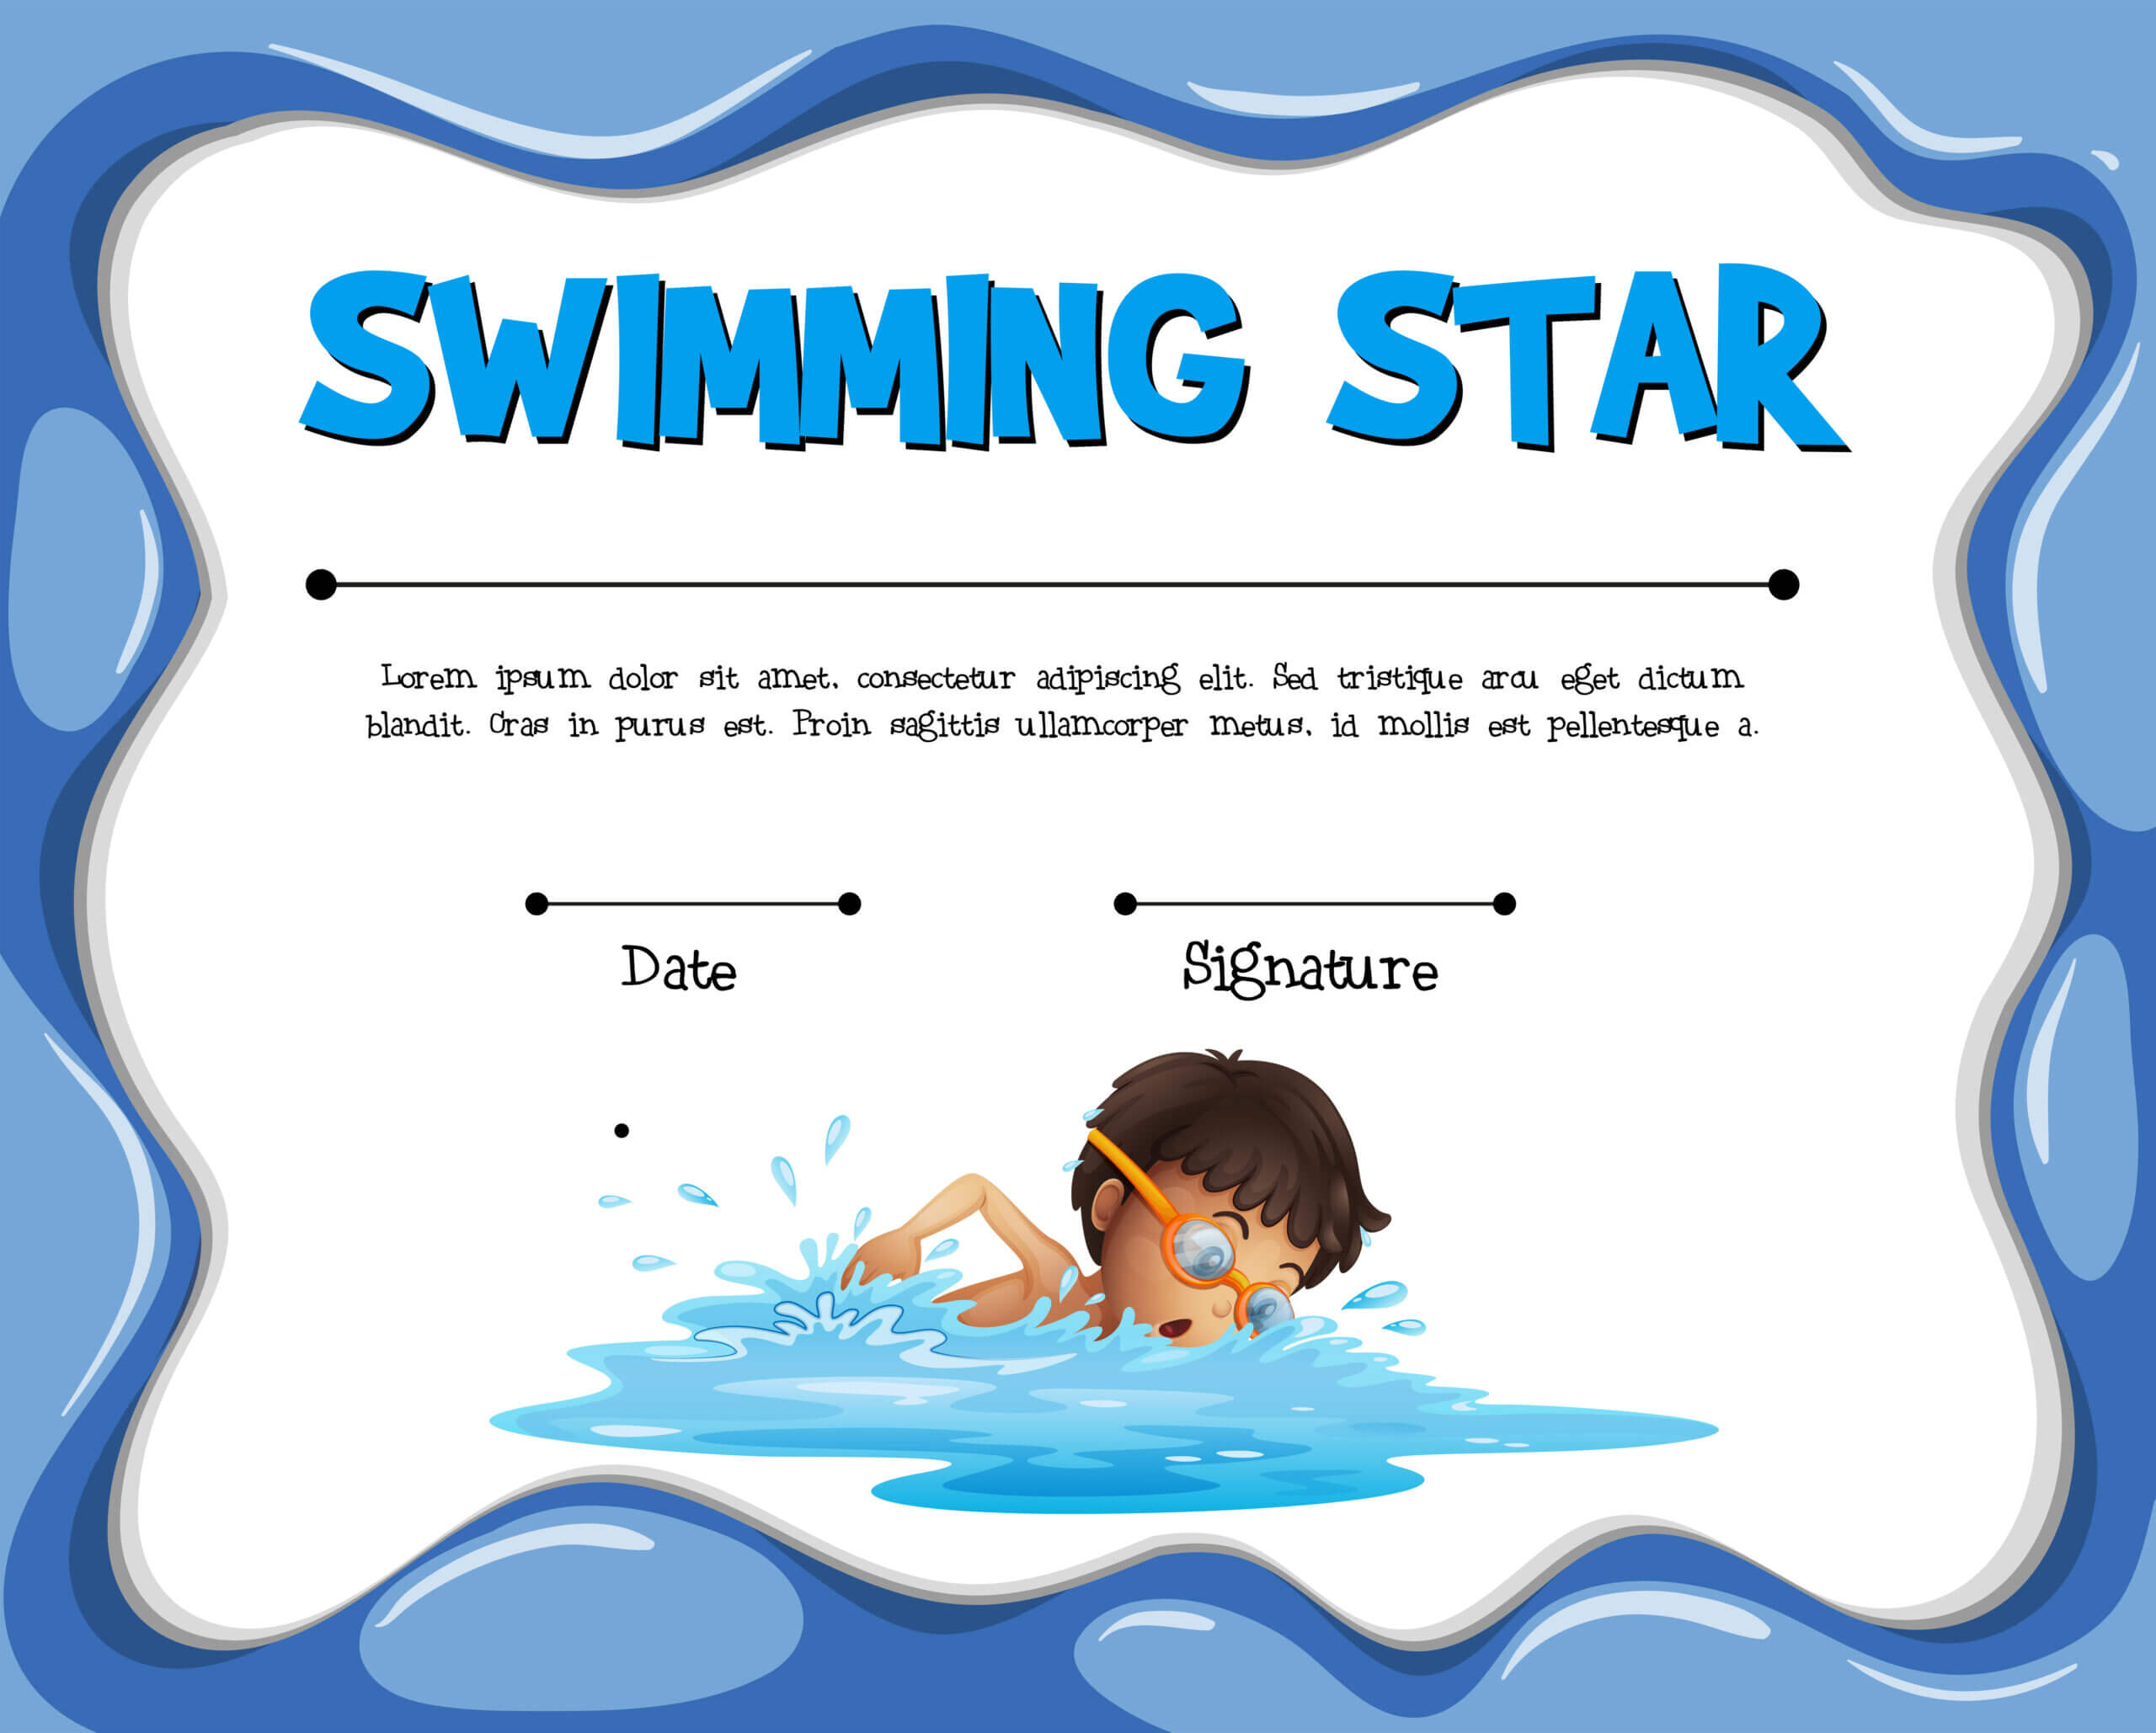 Swimming Star Certification Template With Swimmer – Download Throughout Free Swimming Certificate Templates